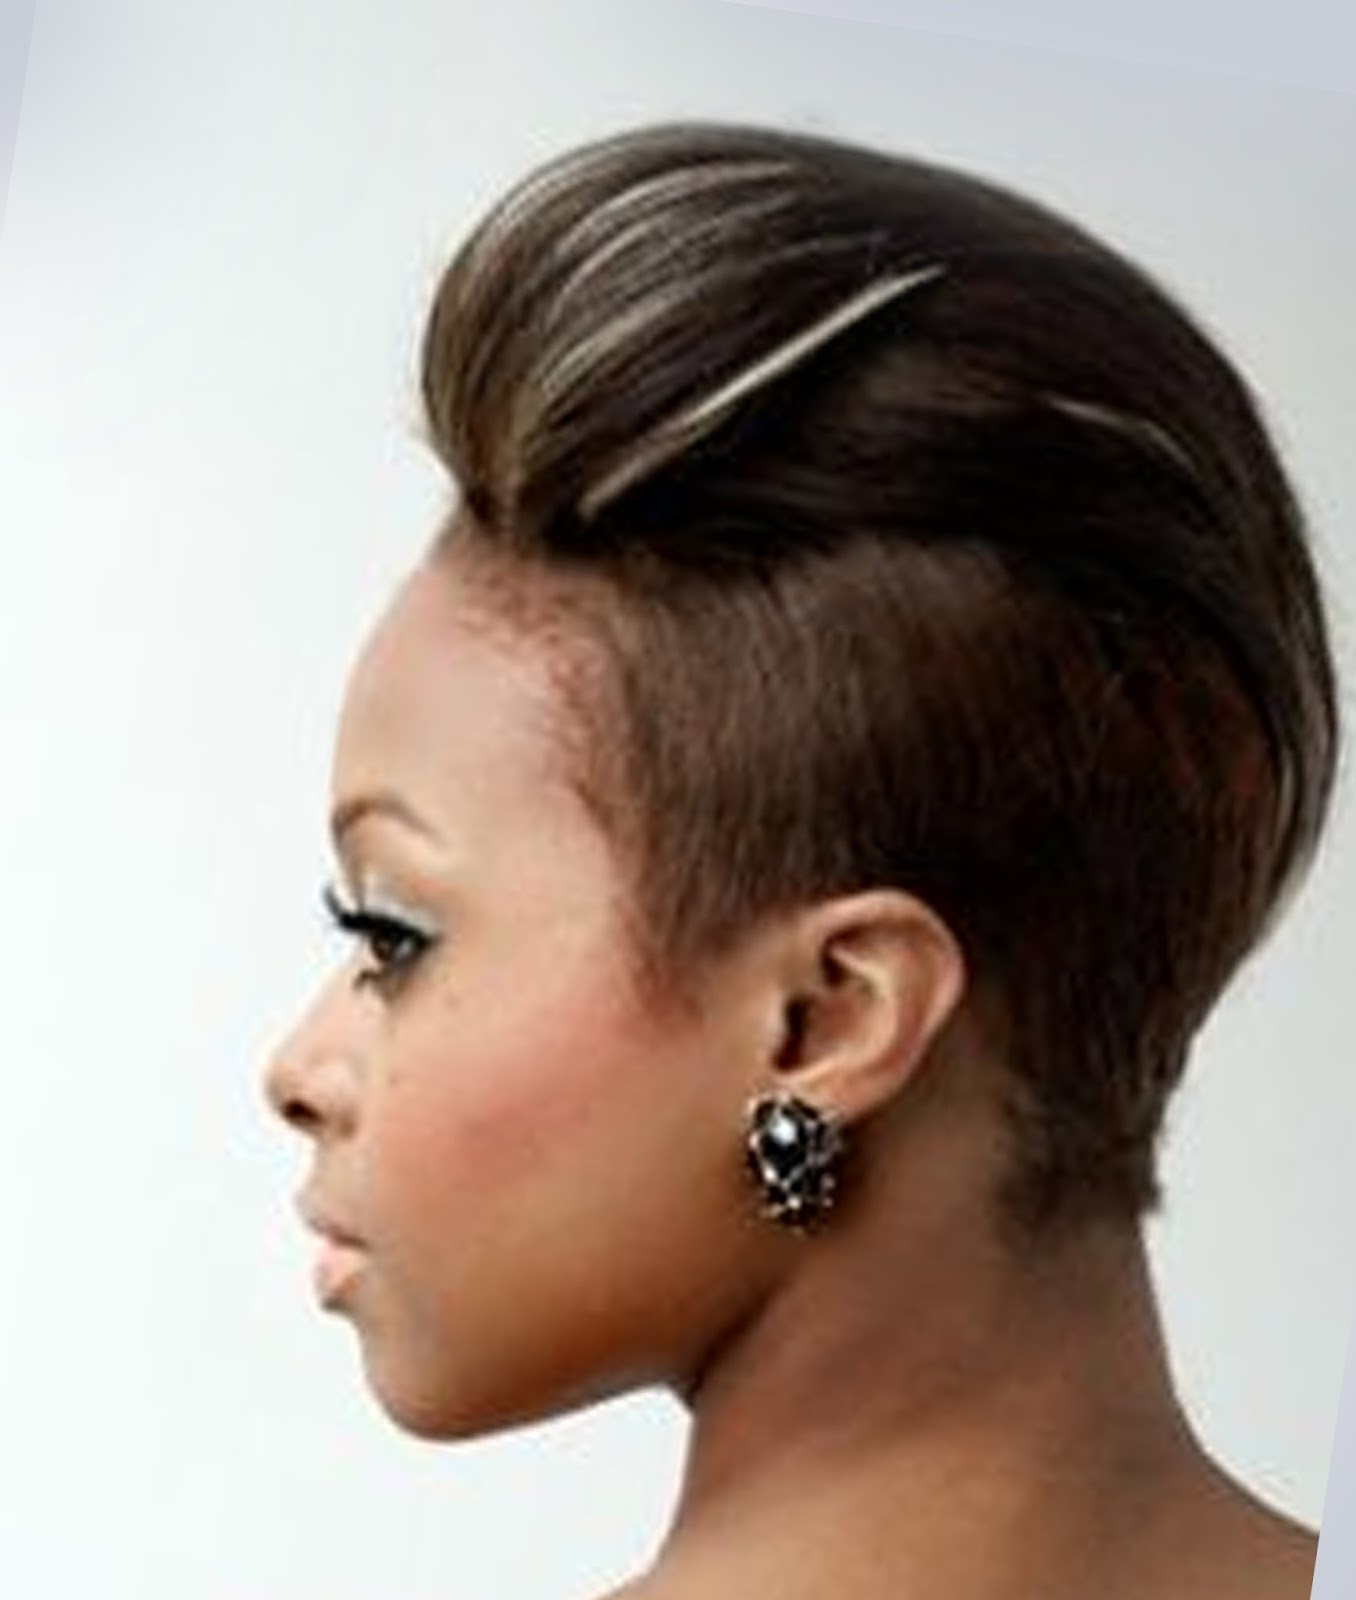 Black Female Mohawk Hairstyles Pictures
 Mohawk Styles for Black Women 2016